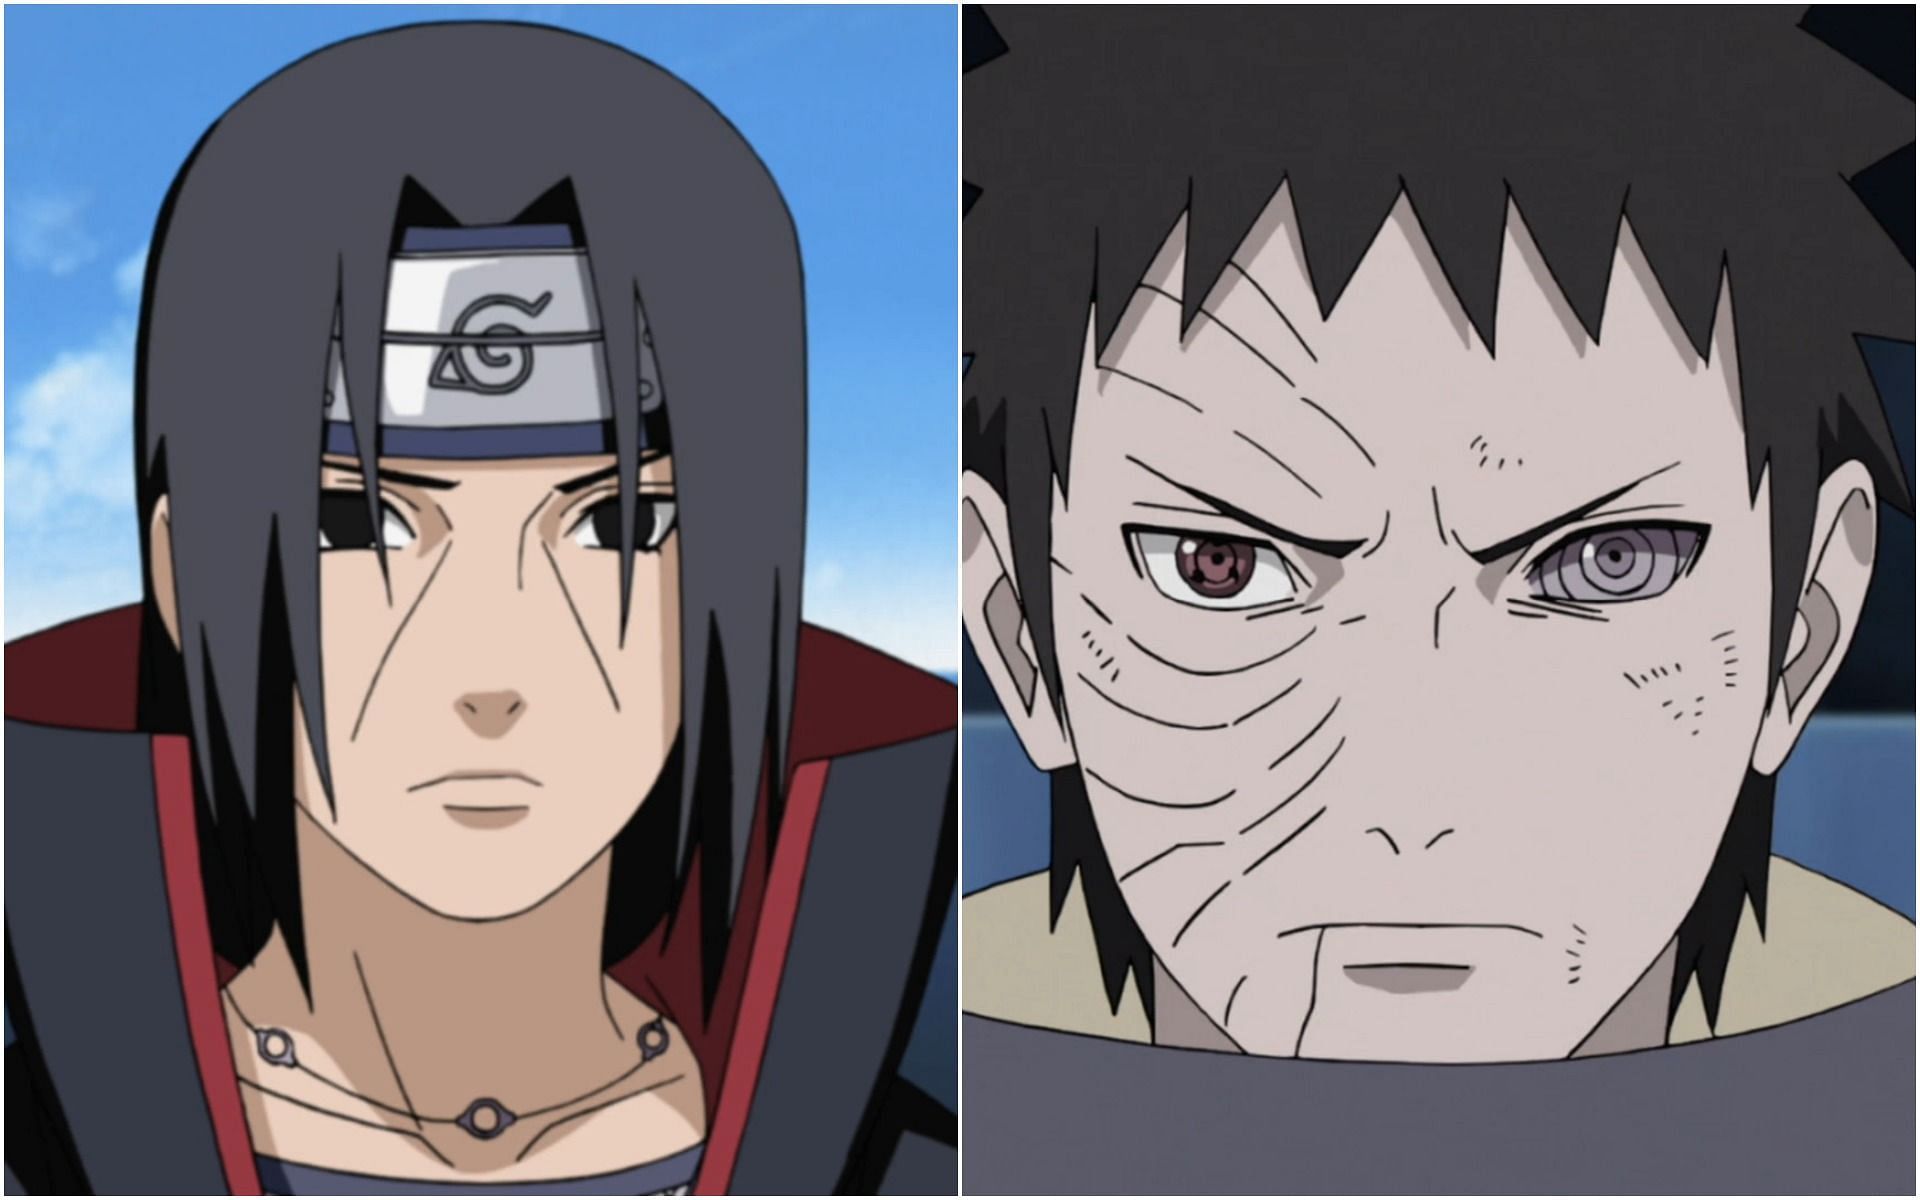 What is the story of Obito from Naruto? - Quora